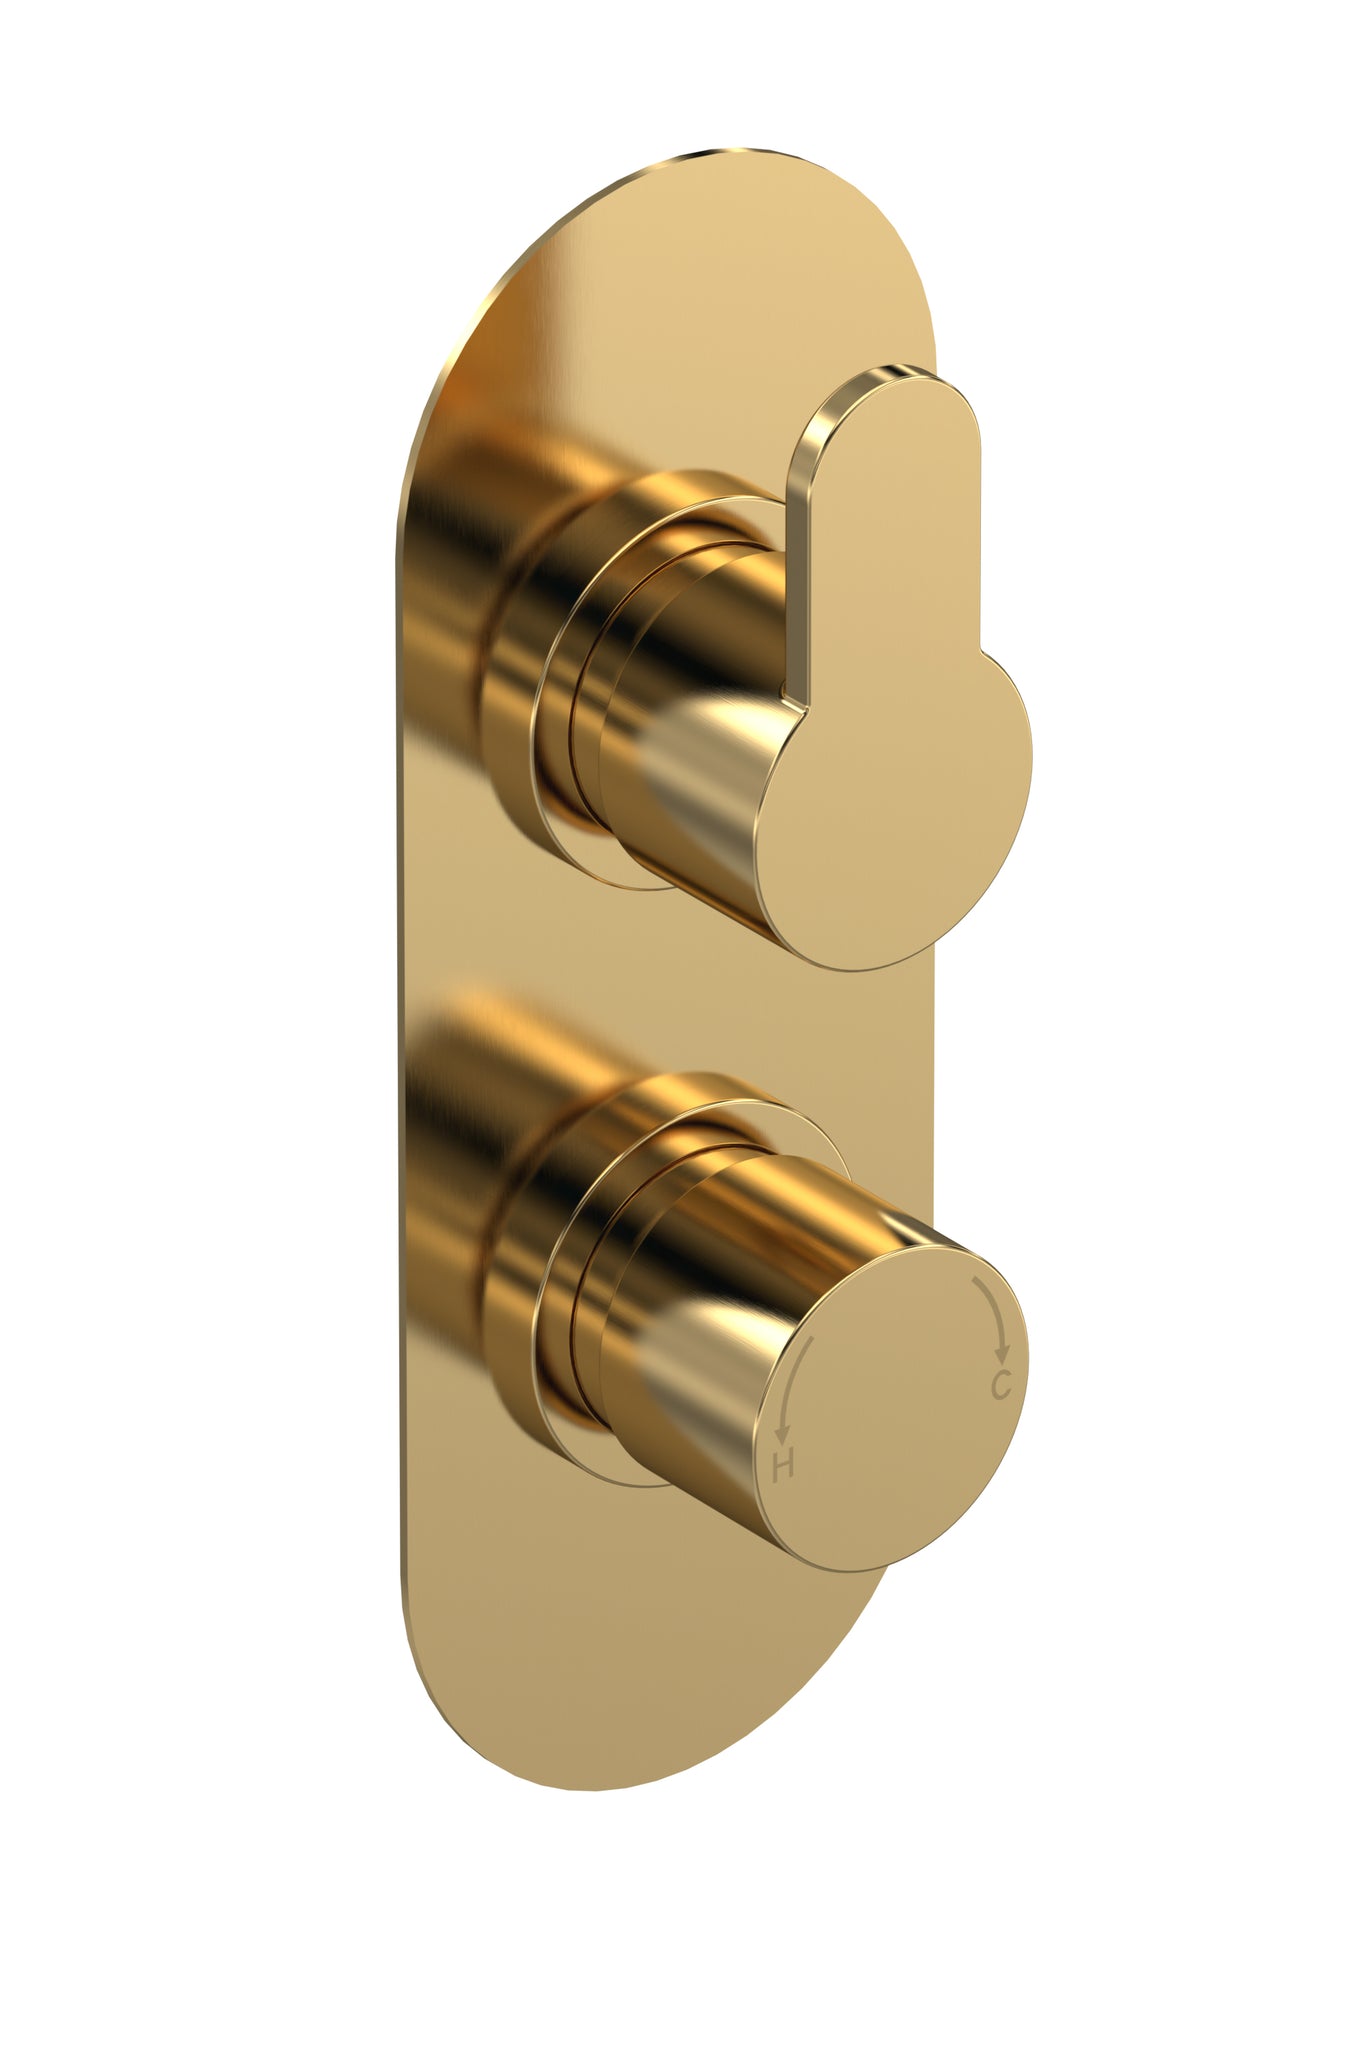 Nuie Arvan Twin Thermostatic Valve With Diverter